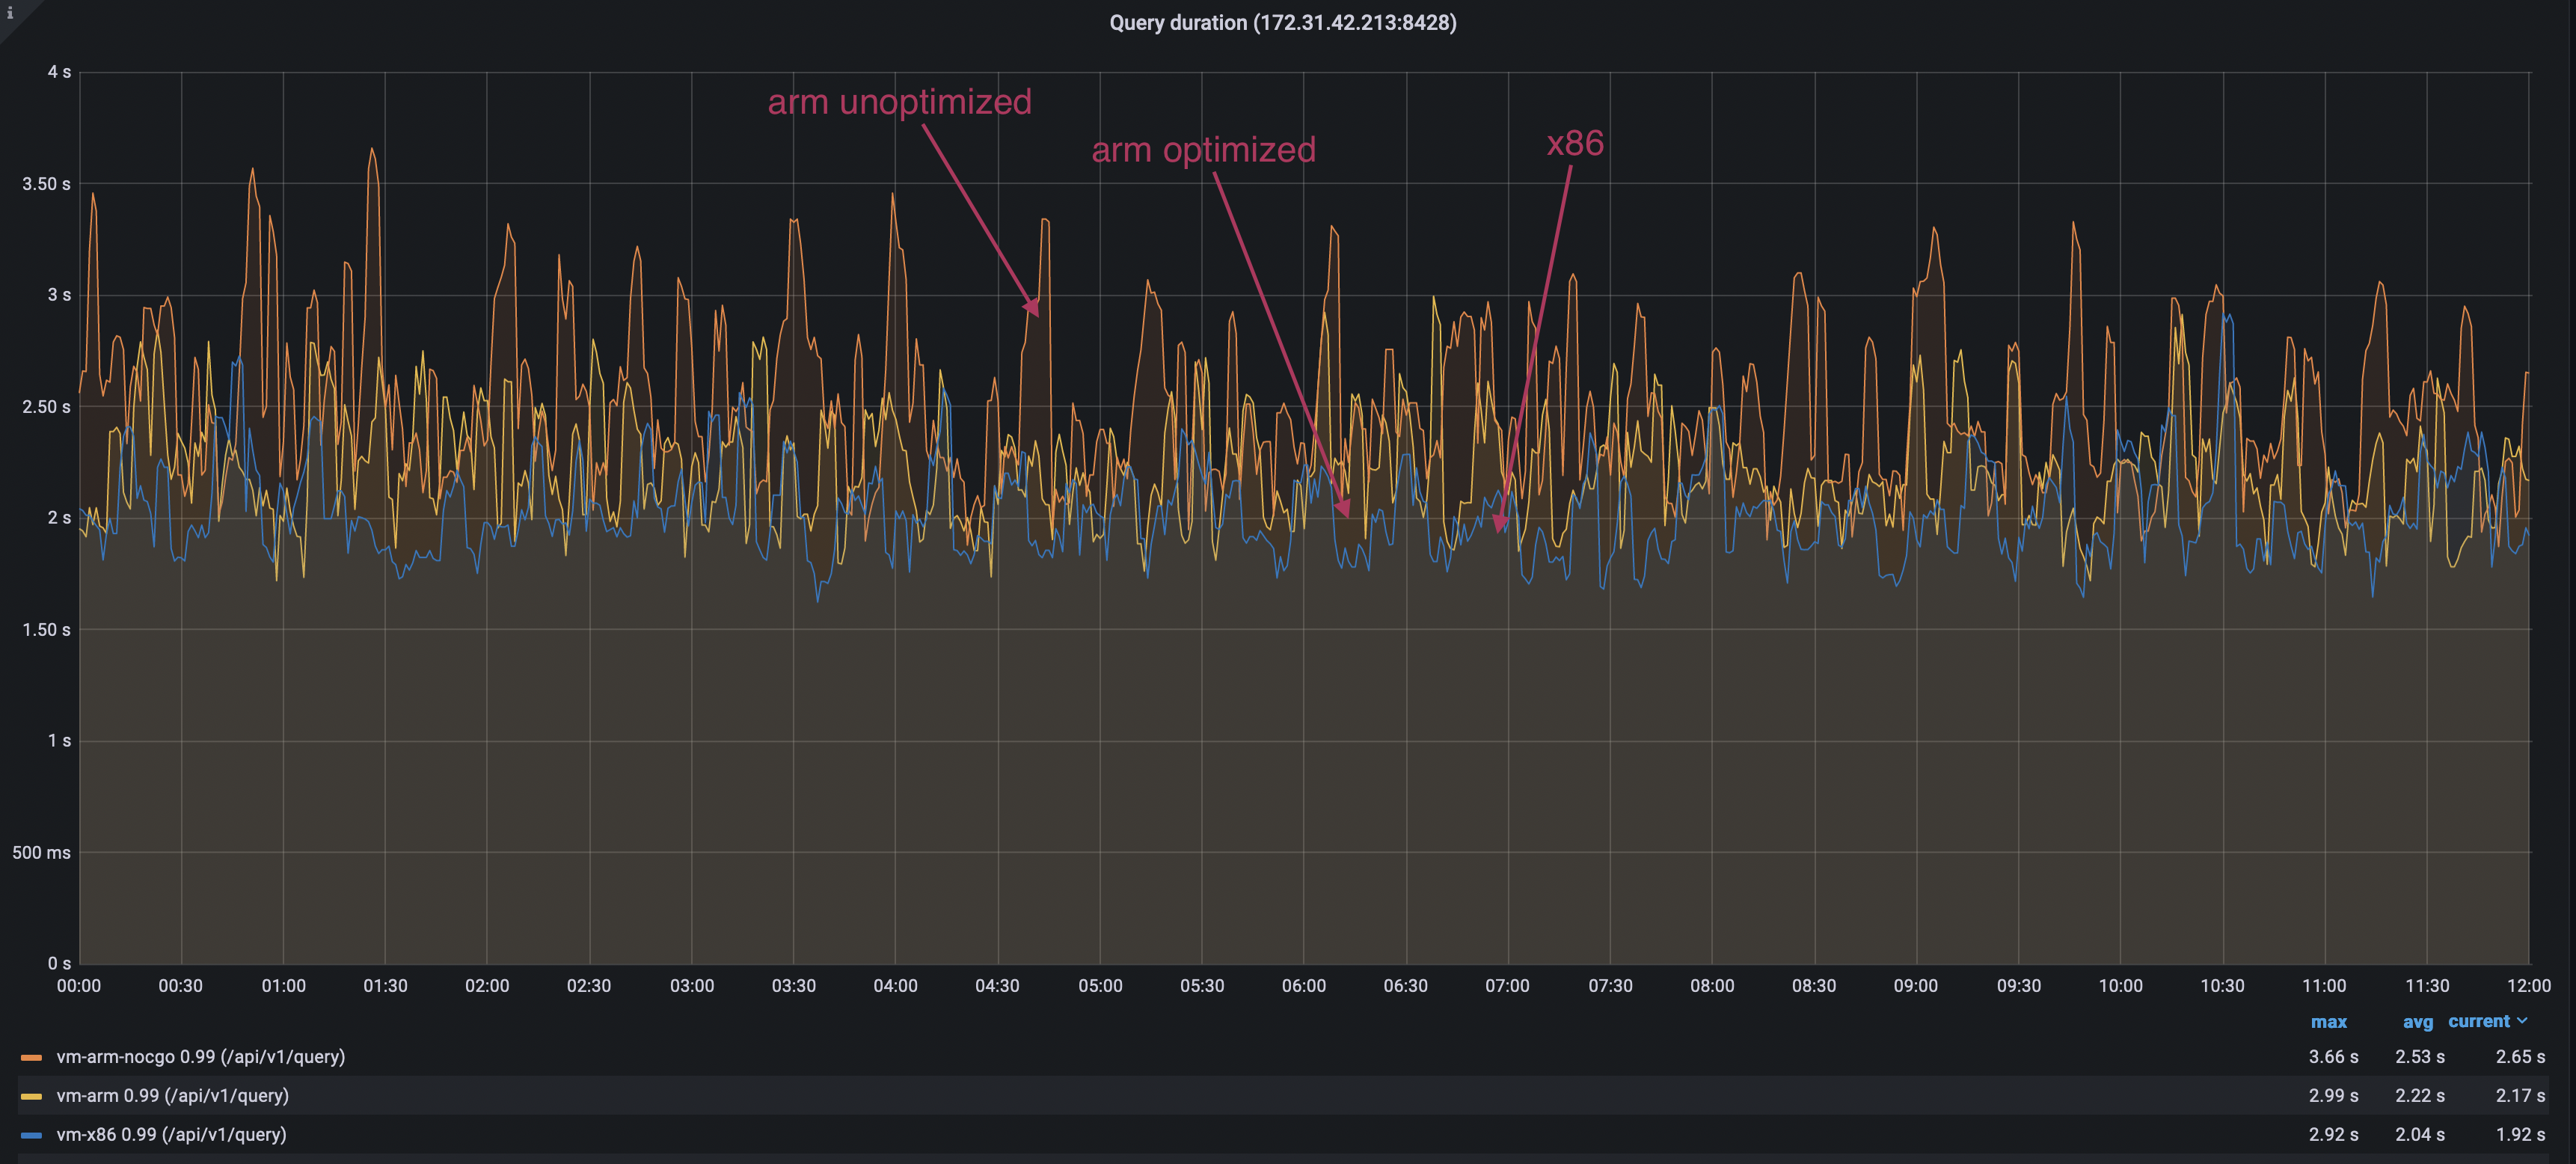 Query latency during the benchmark